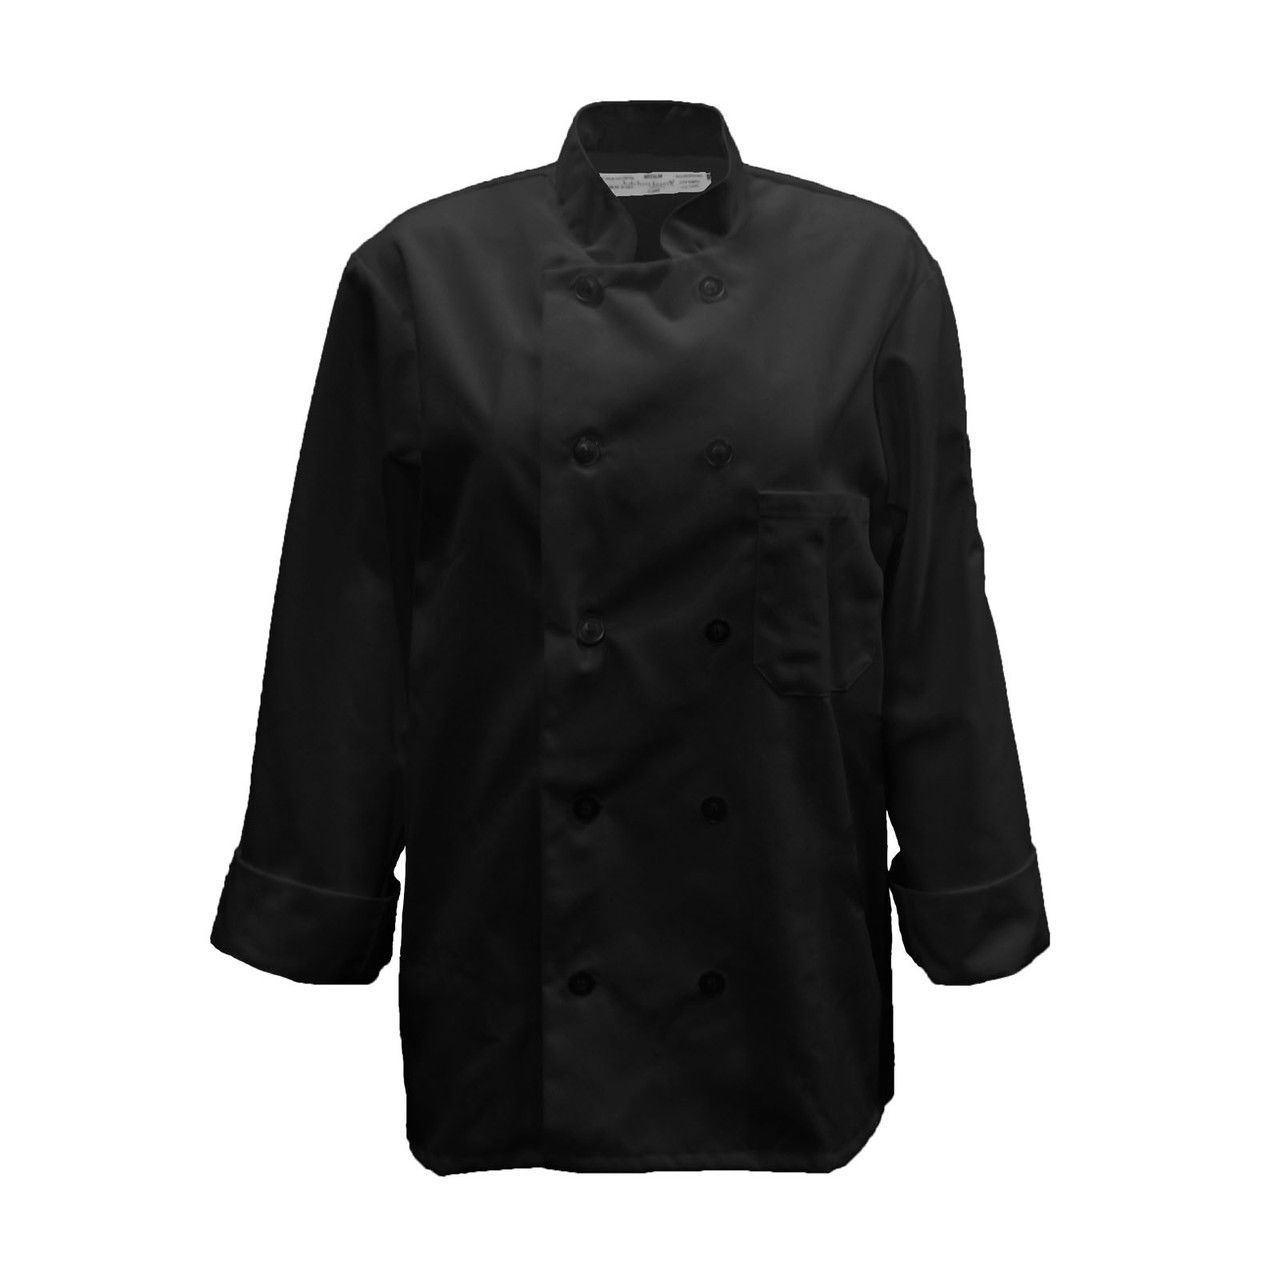 What material is the Basic Economy Double-Breasted Black Chef Coat made of?